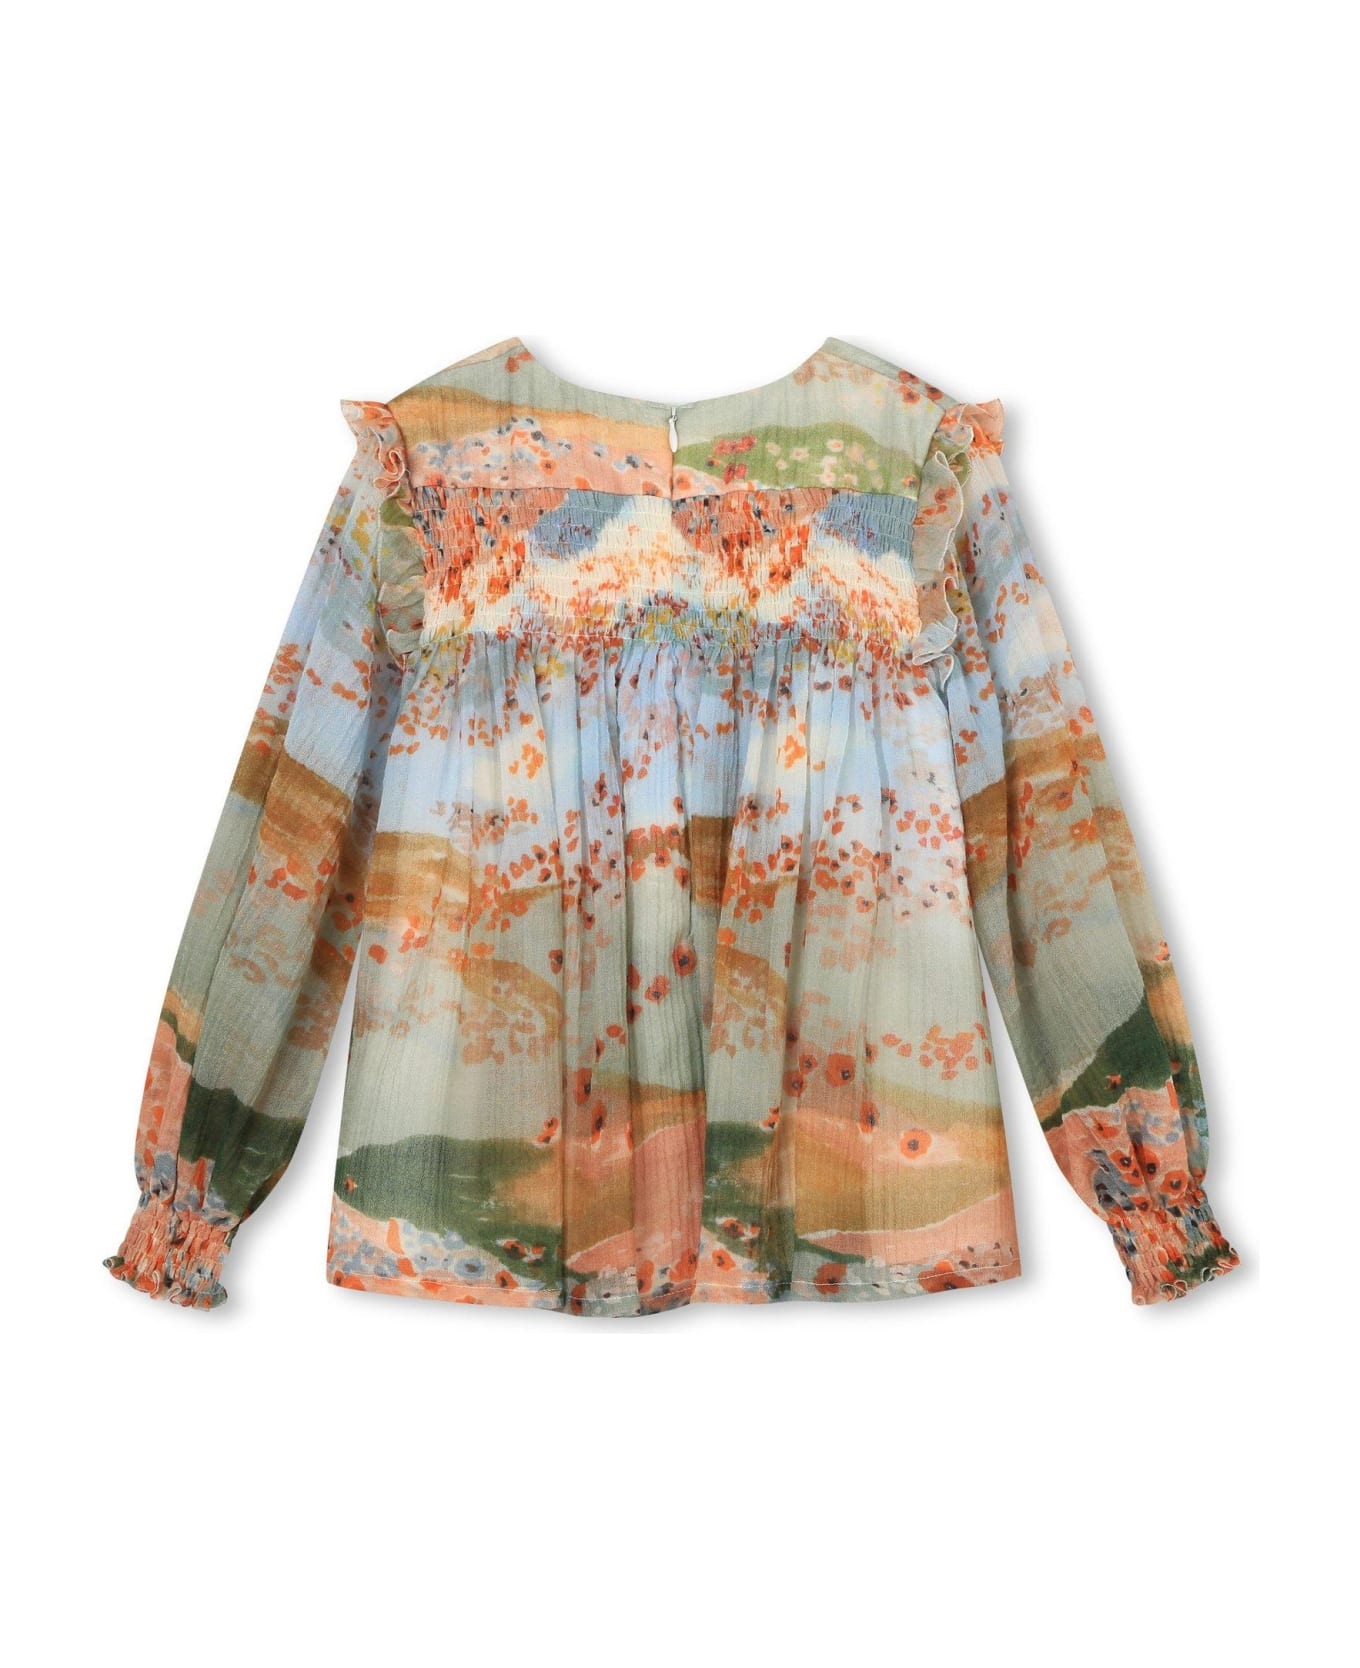 Chloé Ceremony Graphic Printed Ruffled Detail Blouse - Multicolor